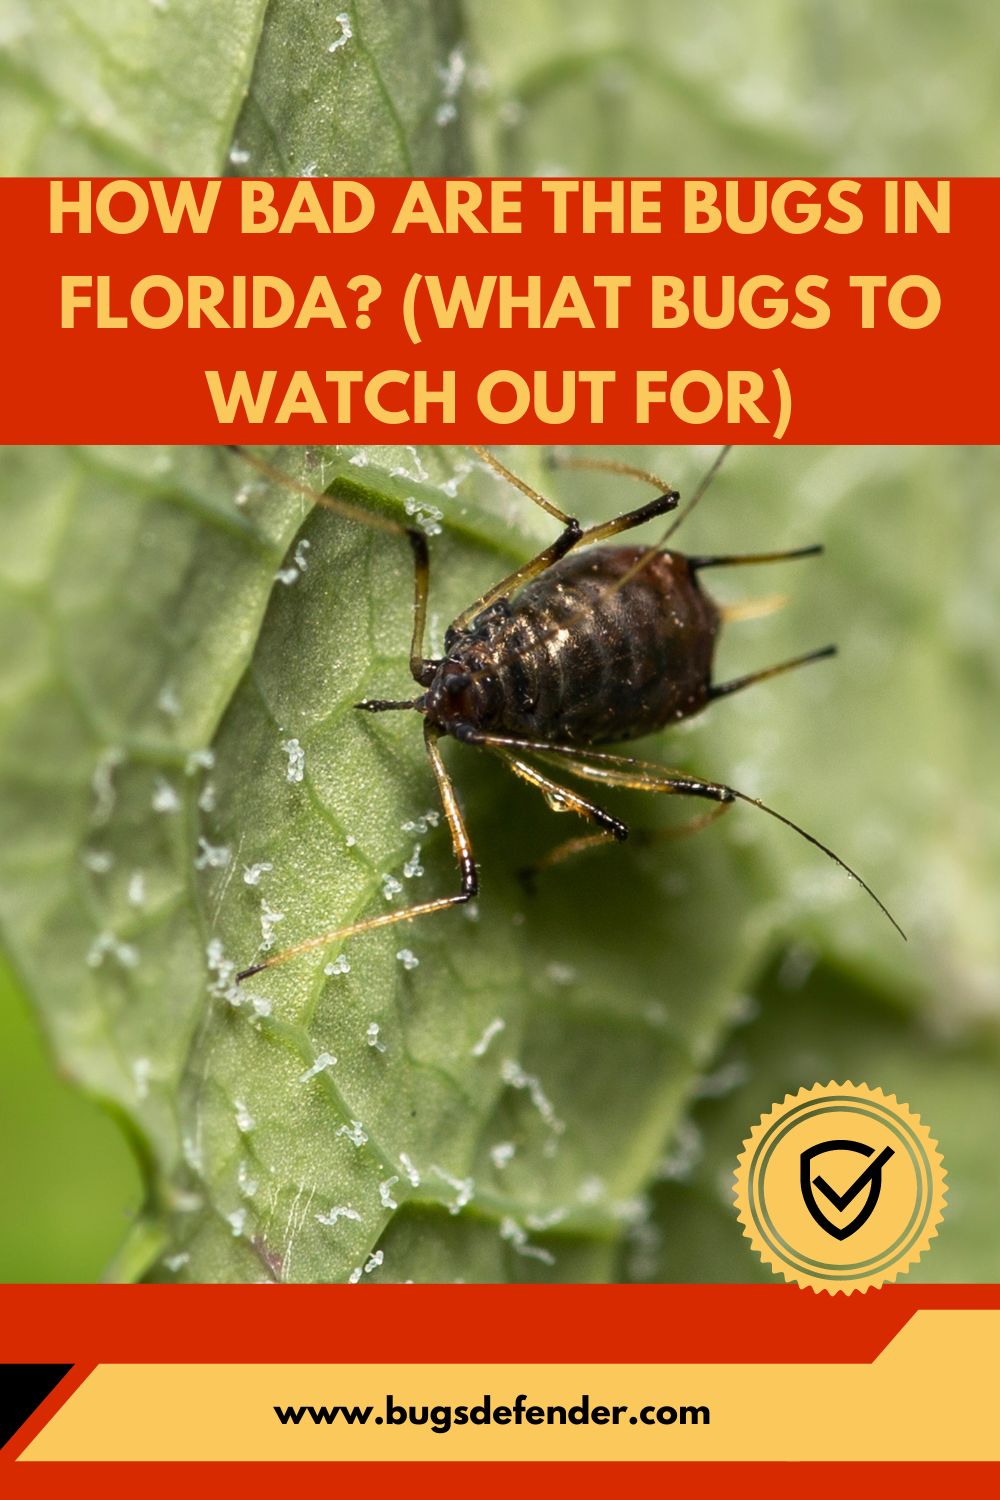 How Bad Are The Bugs In Florida? (What Bugs To Watch Out For) pin 2